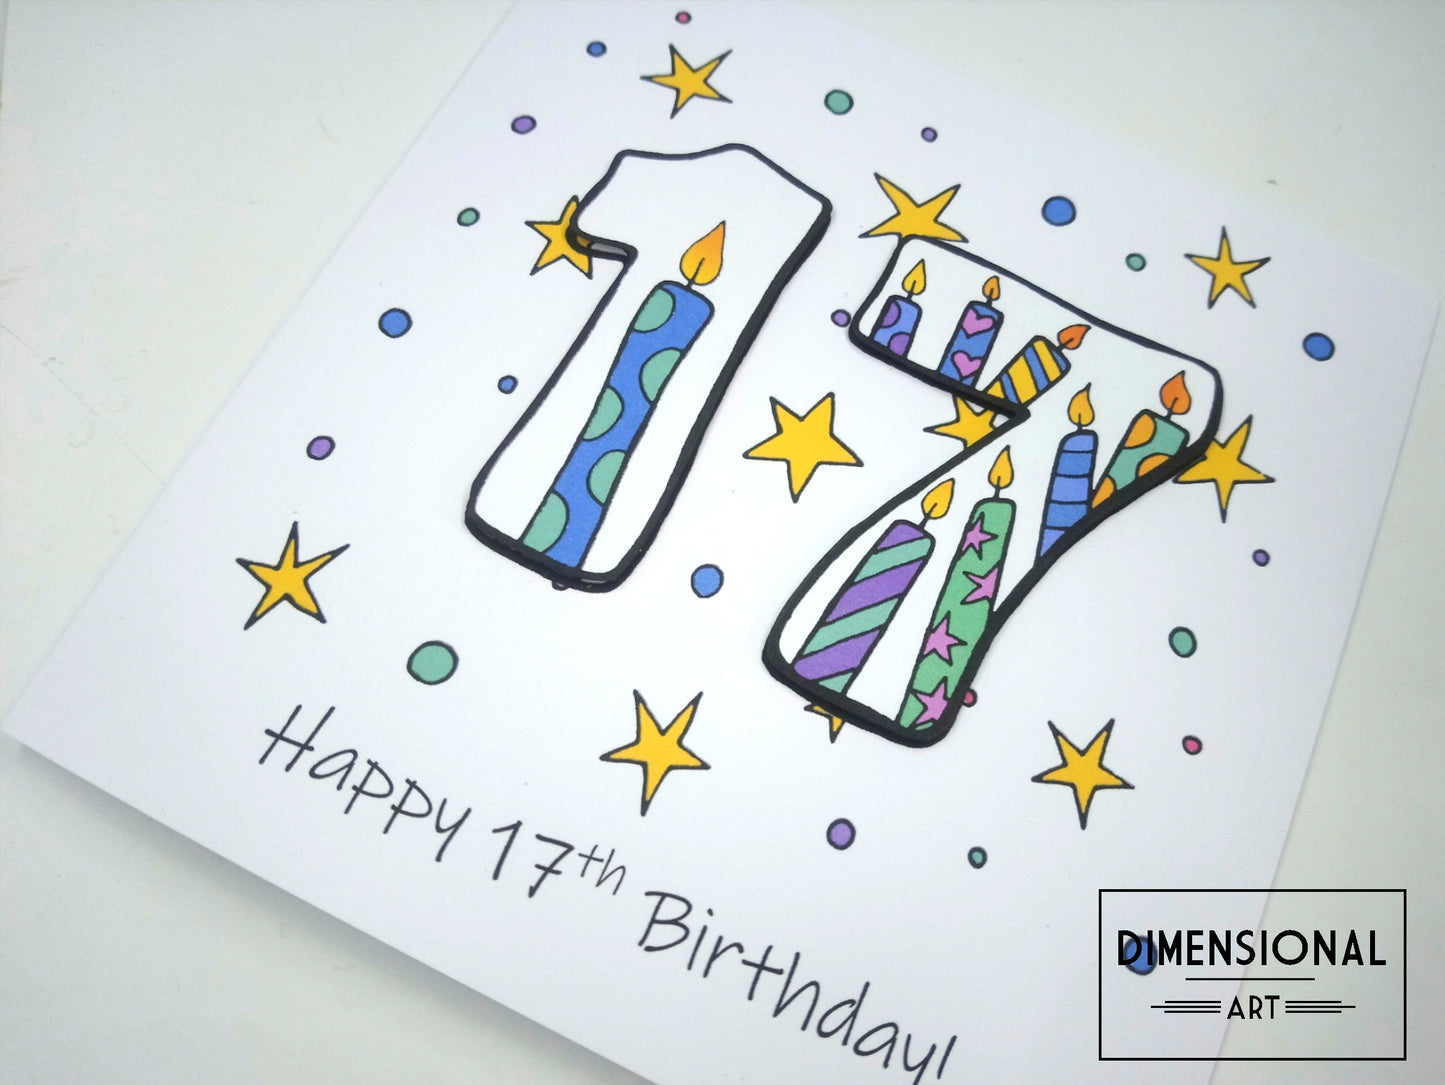 17th Number Candles Birthday Card